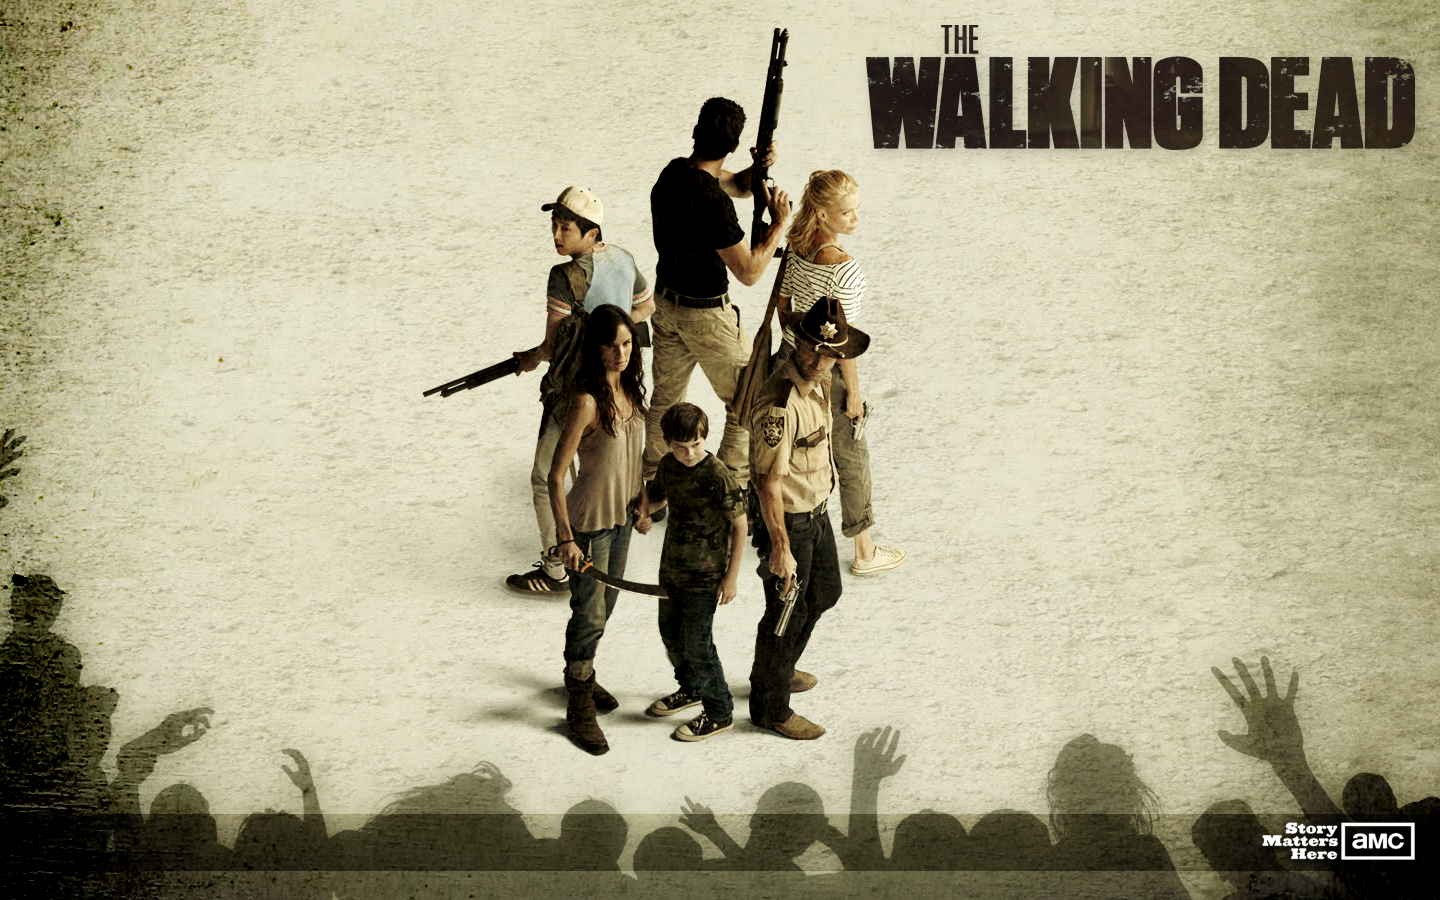 The Walking Dead is a television drama series developed by Frank